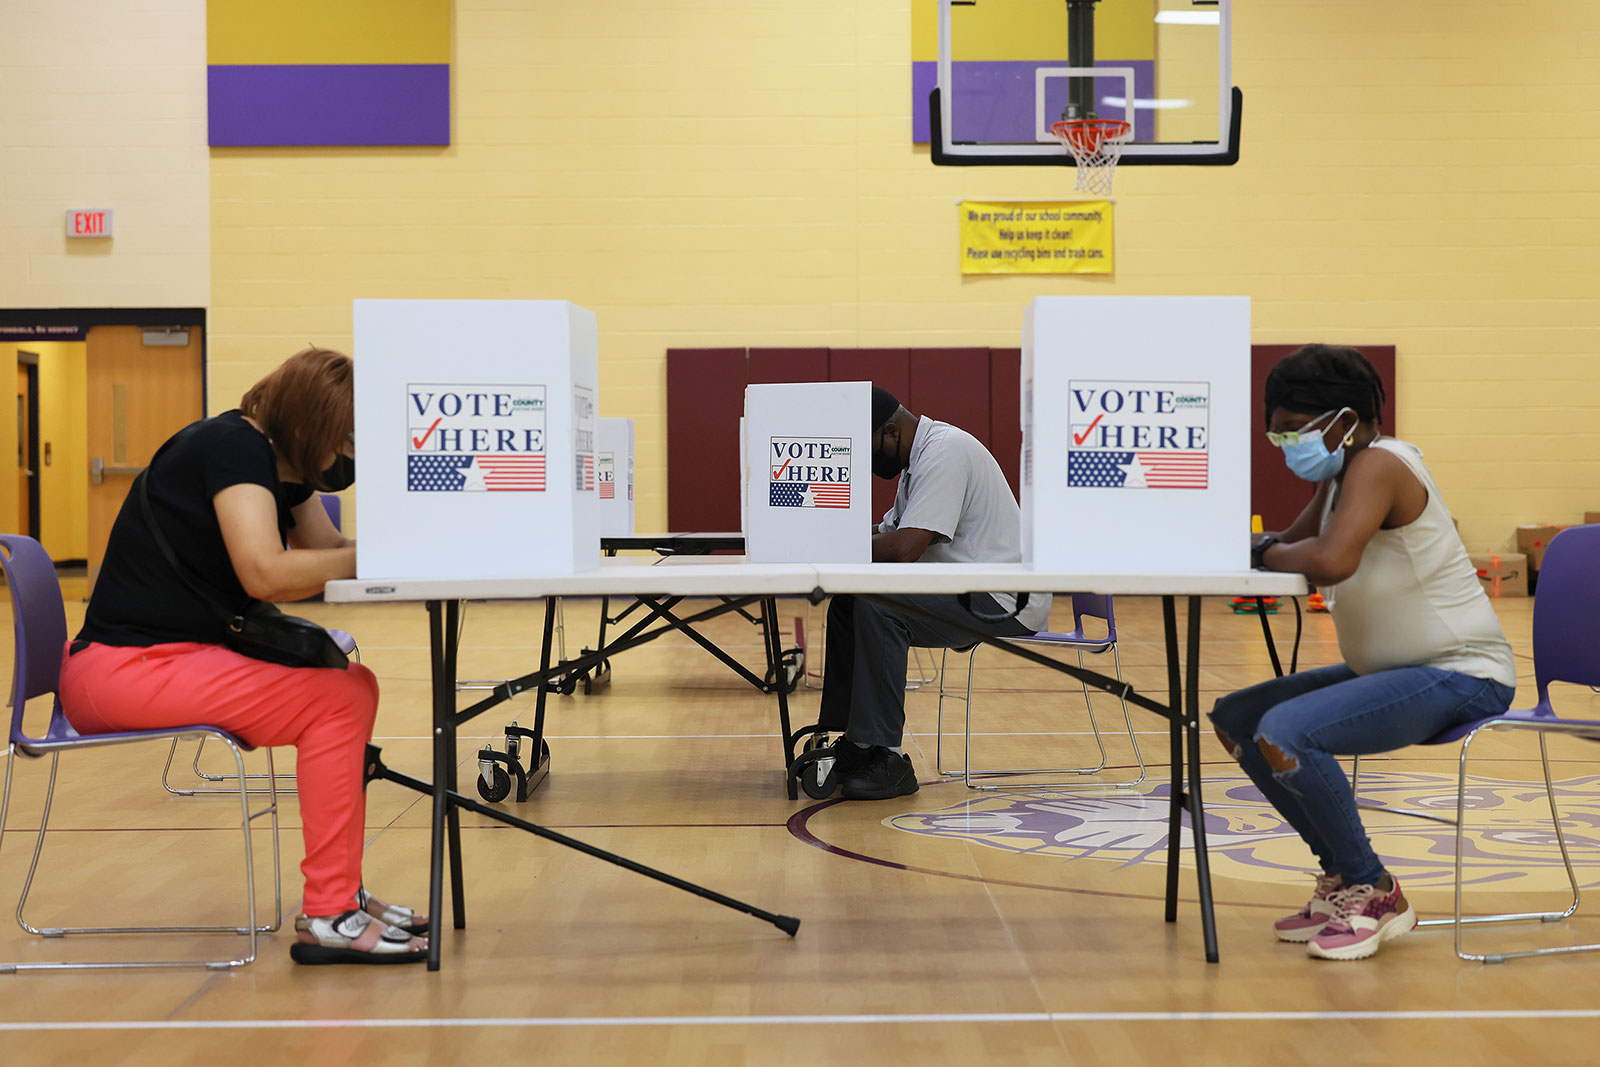 People vote during primary election day at Barack Obama Elementary School on Tuesday in St. Louis, Missouri.